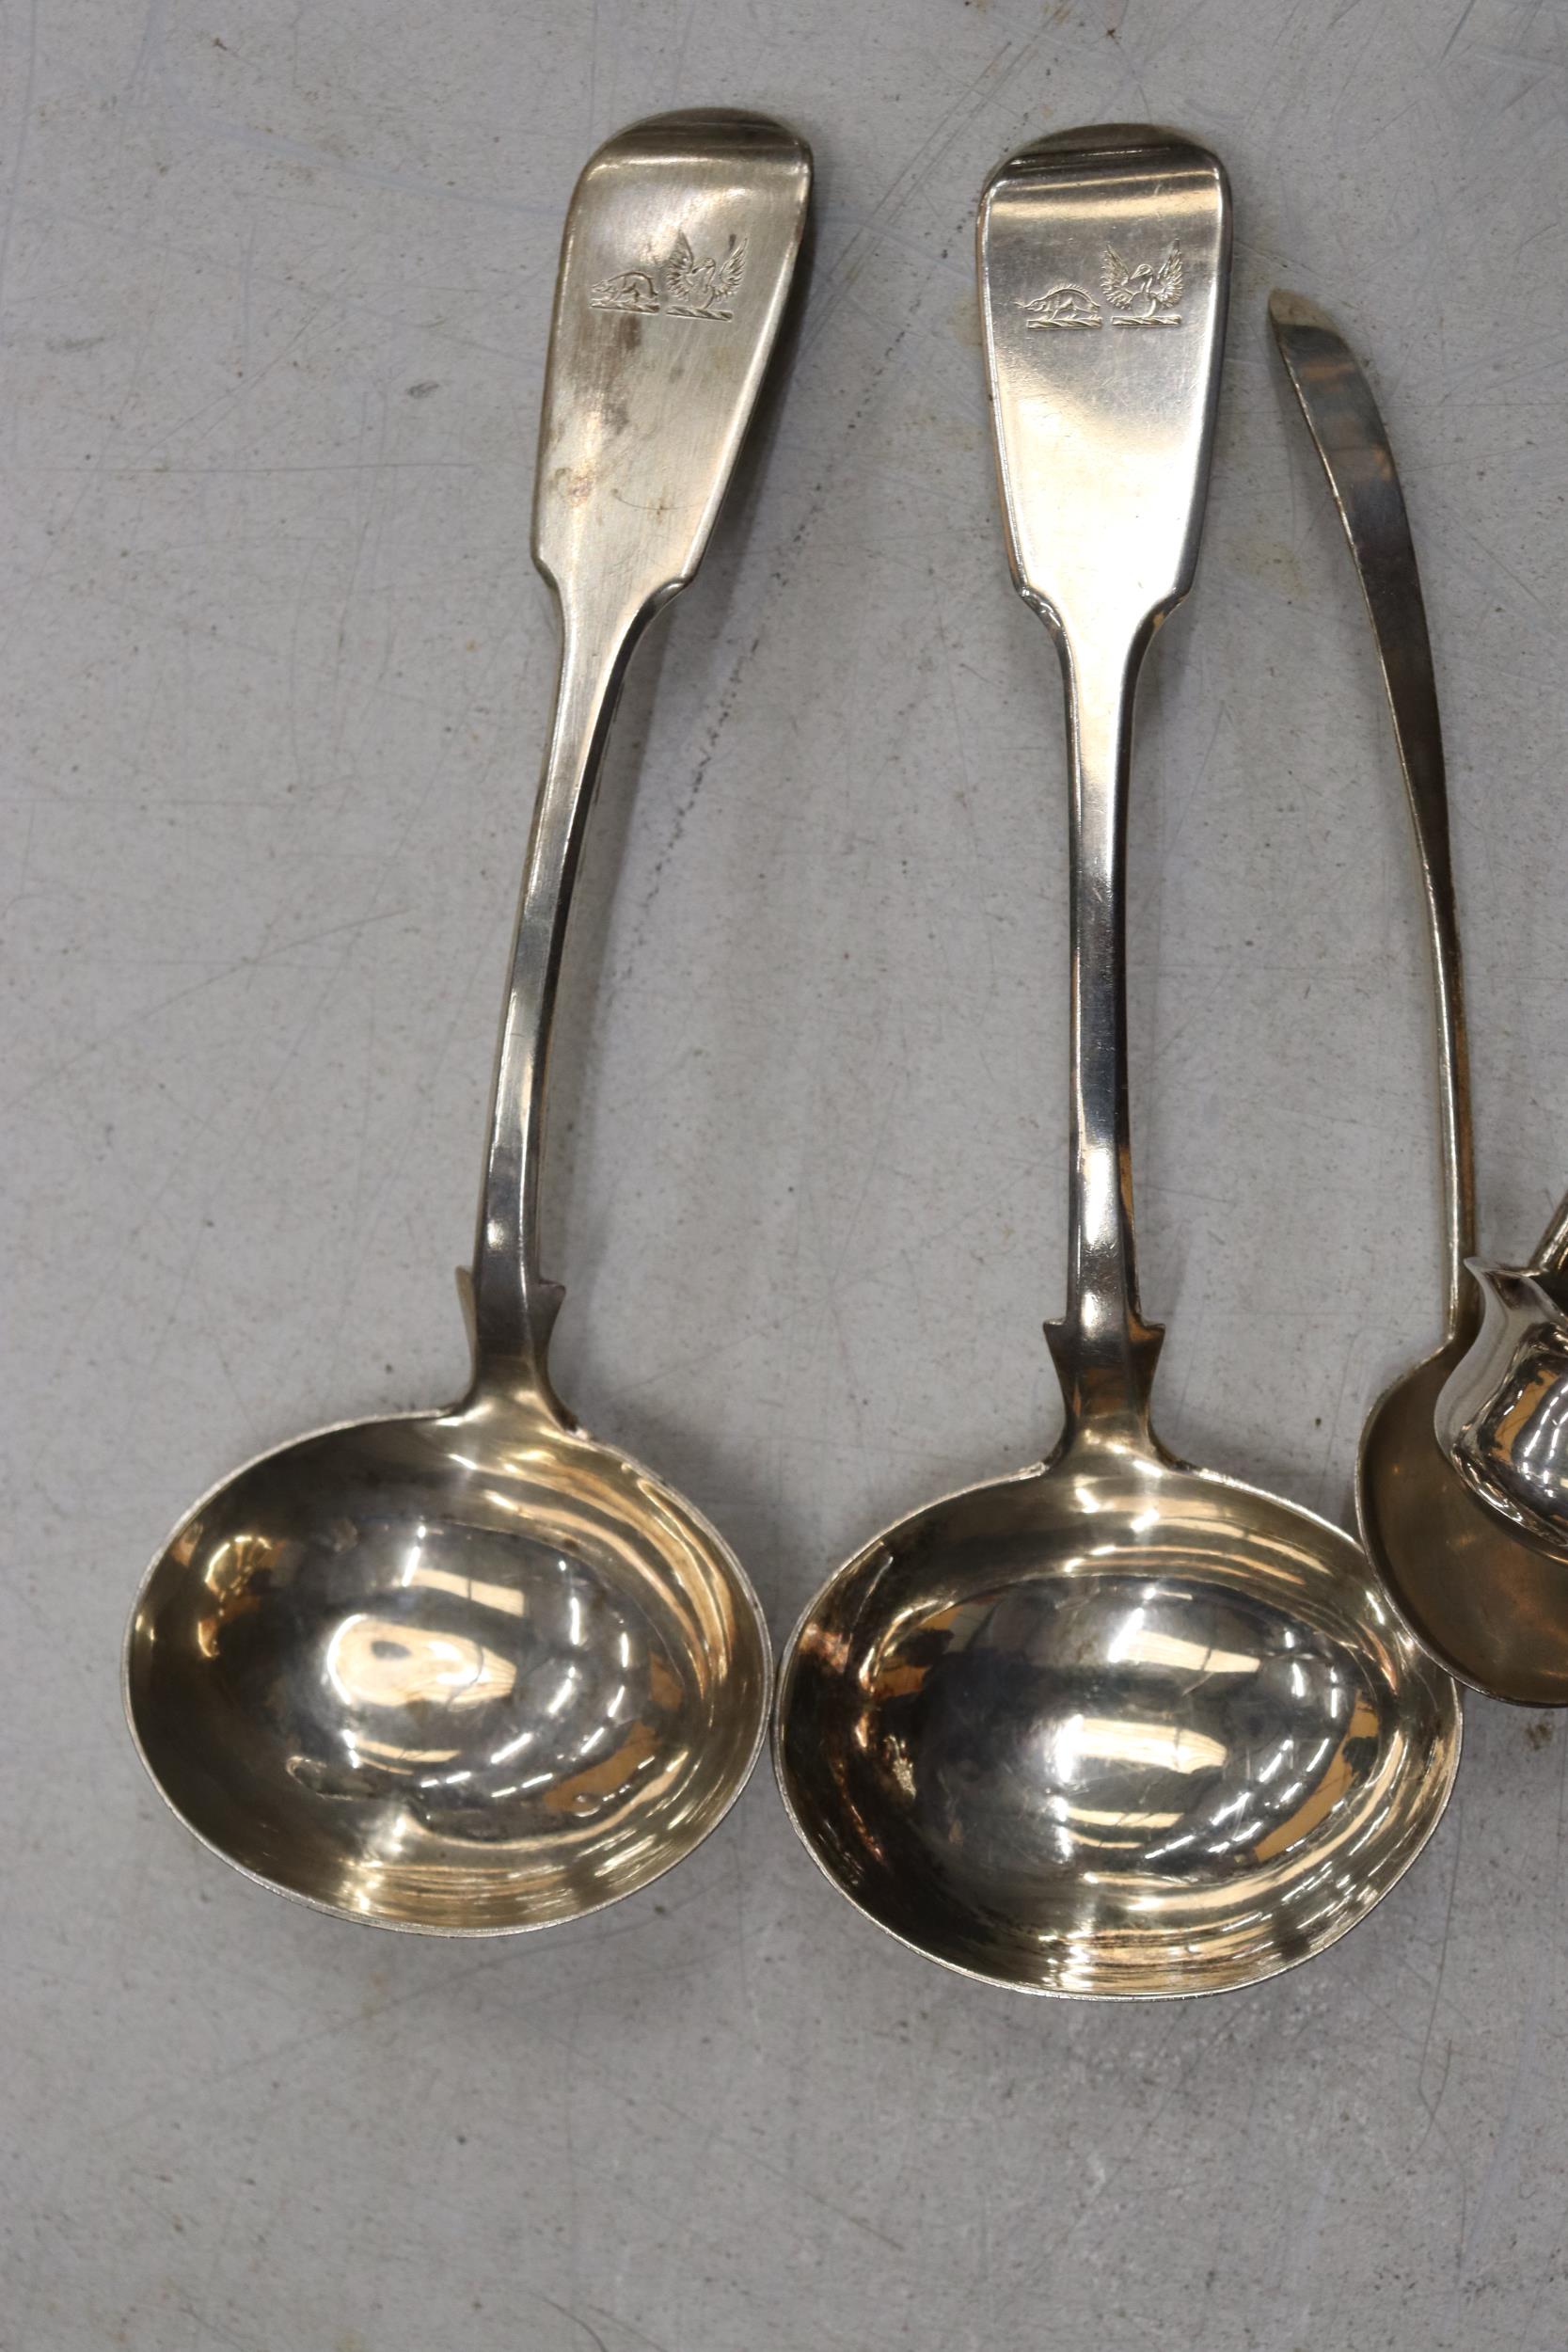 SIX HALLMARKED SILVER ITEMS TO INCLUDE LADELS, NIPS AND SPOONS GROSS WEIGHT 184 GRAMS - Image 3 of 9